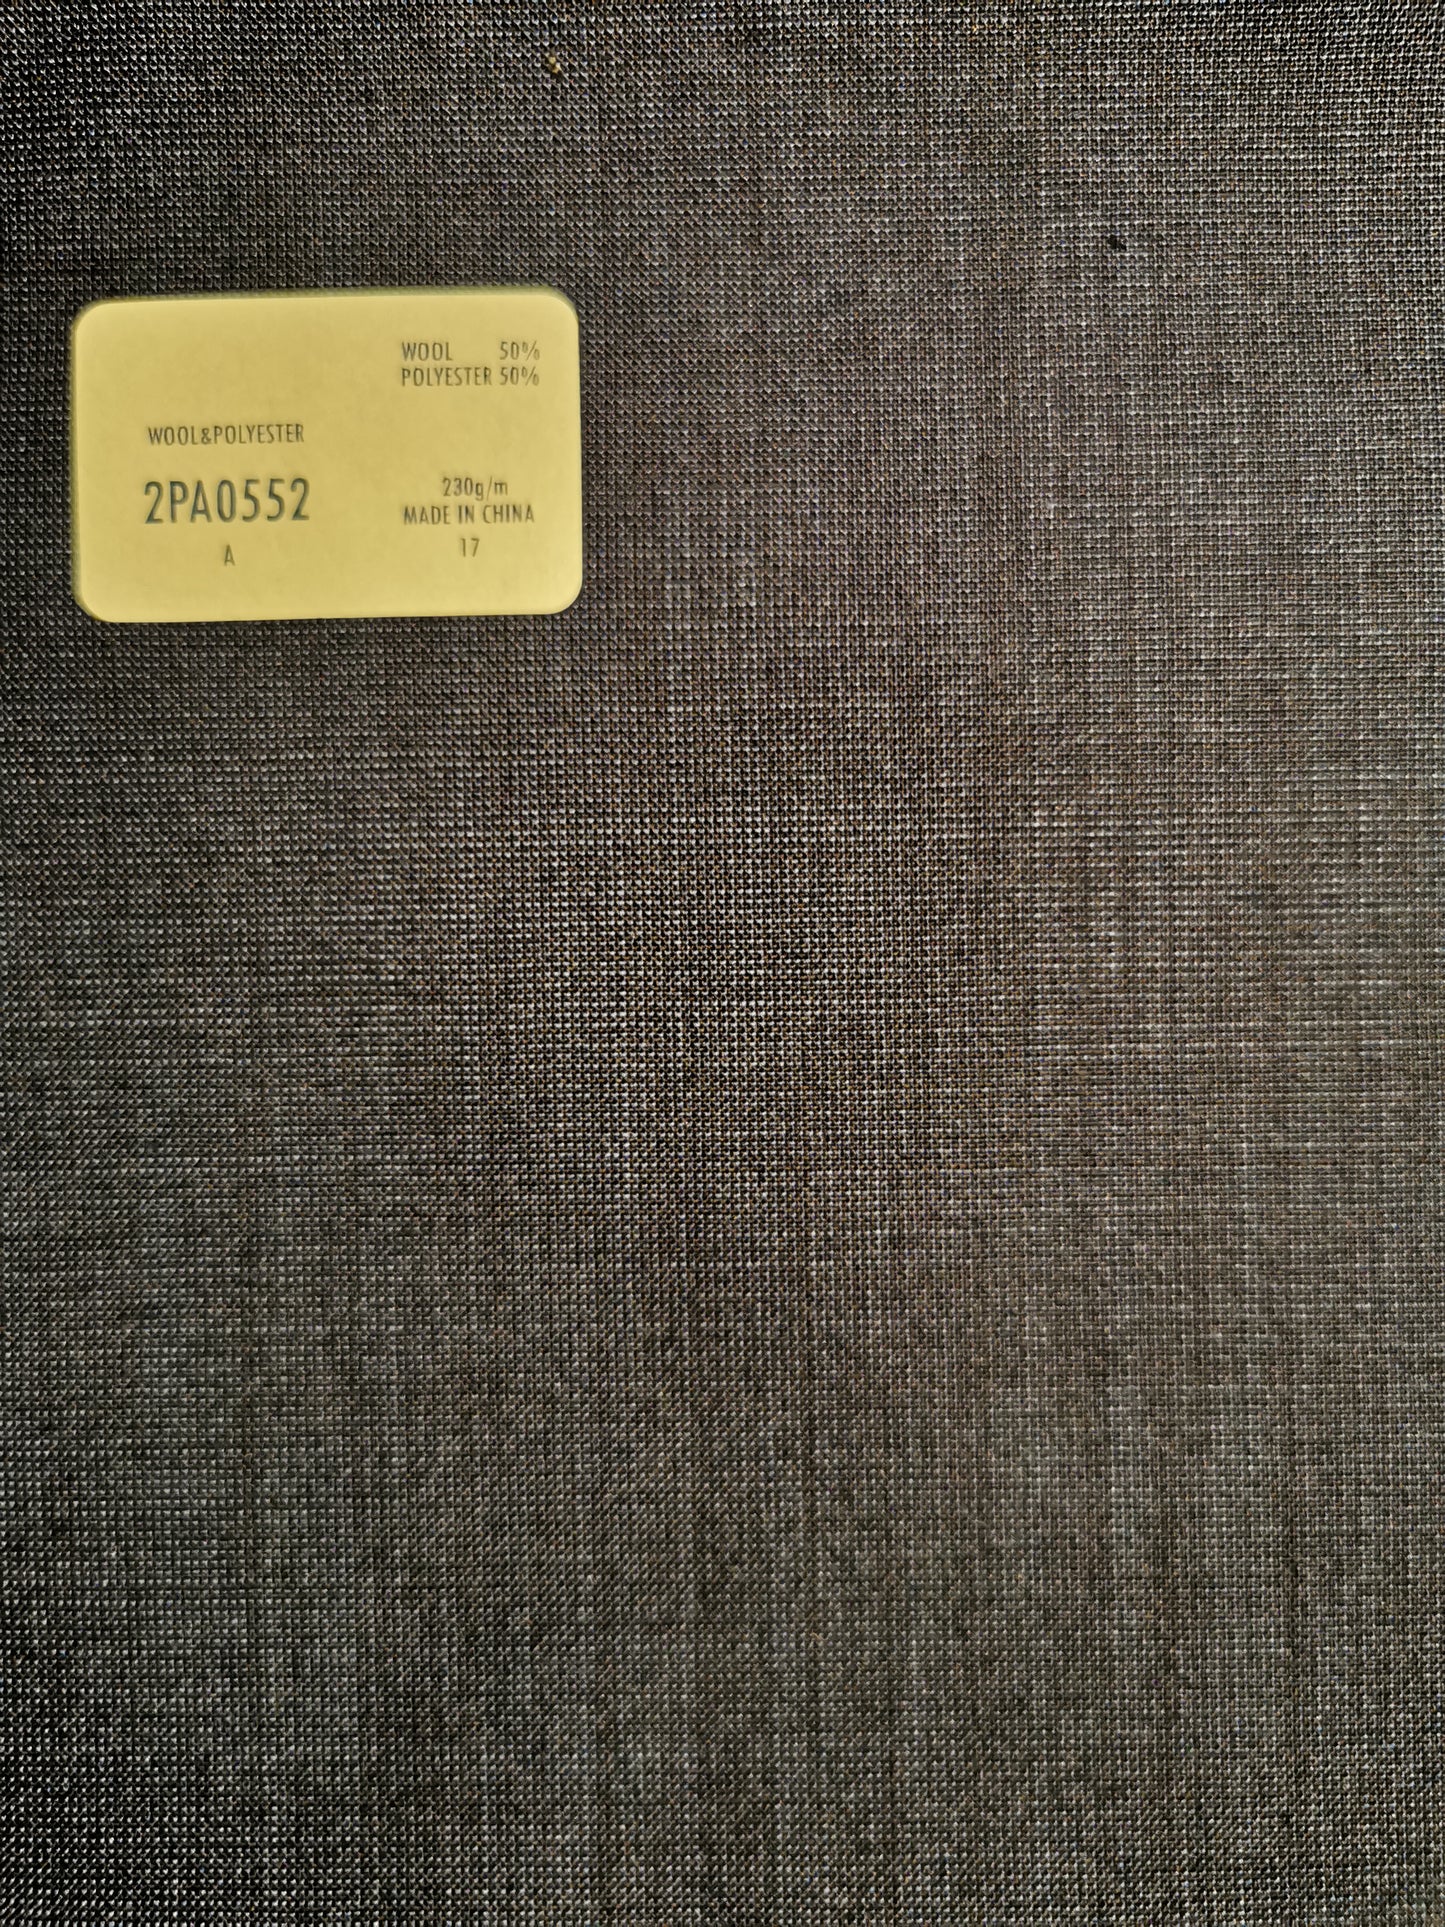 Brand : Their Suits Clubhouse Textile ID : 2PA0552